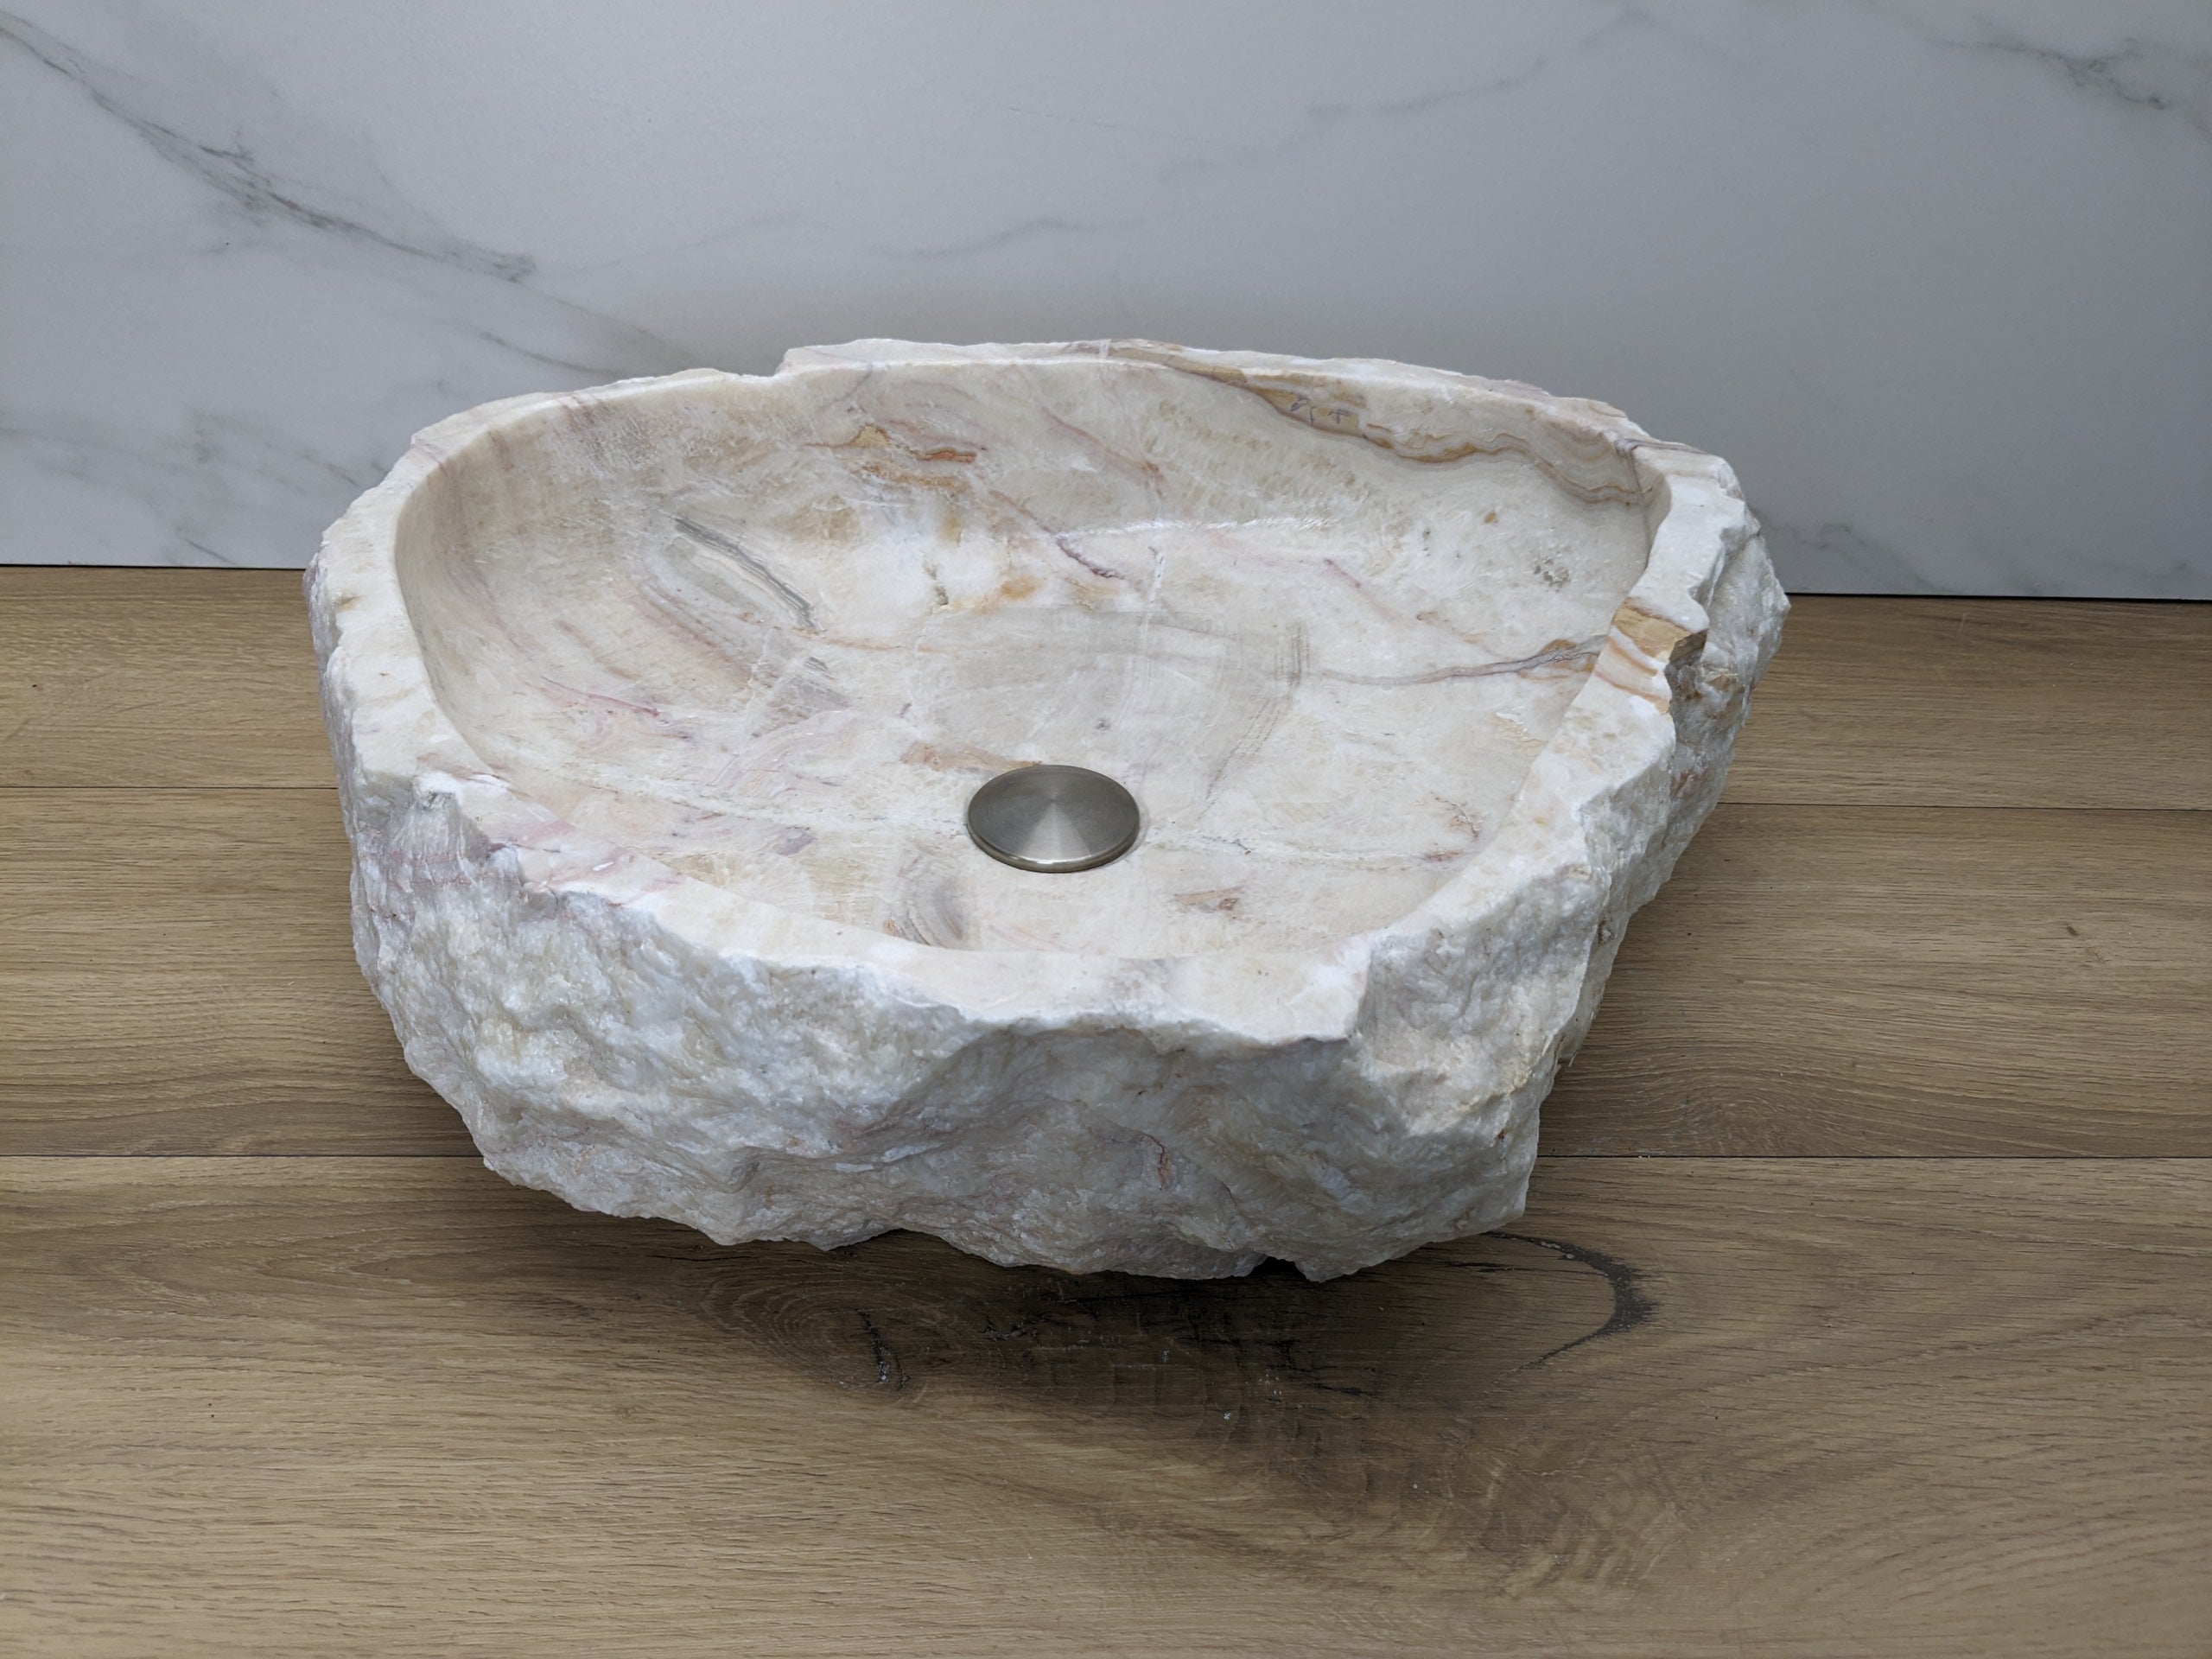 White and Cream Onyx Rustic Bathroom Vessel Sink. A beautiful work of art. We offer fast shipping. Handmade in Mexico. We hand finish, package, and ship from the USA. Buy now at www.felipeandgrace.com. 